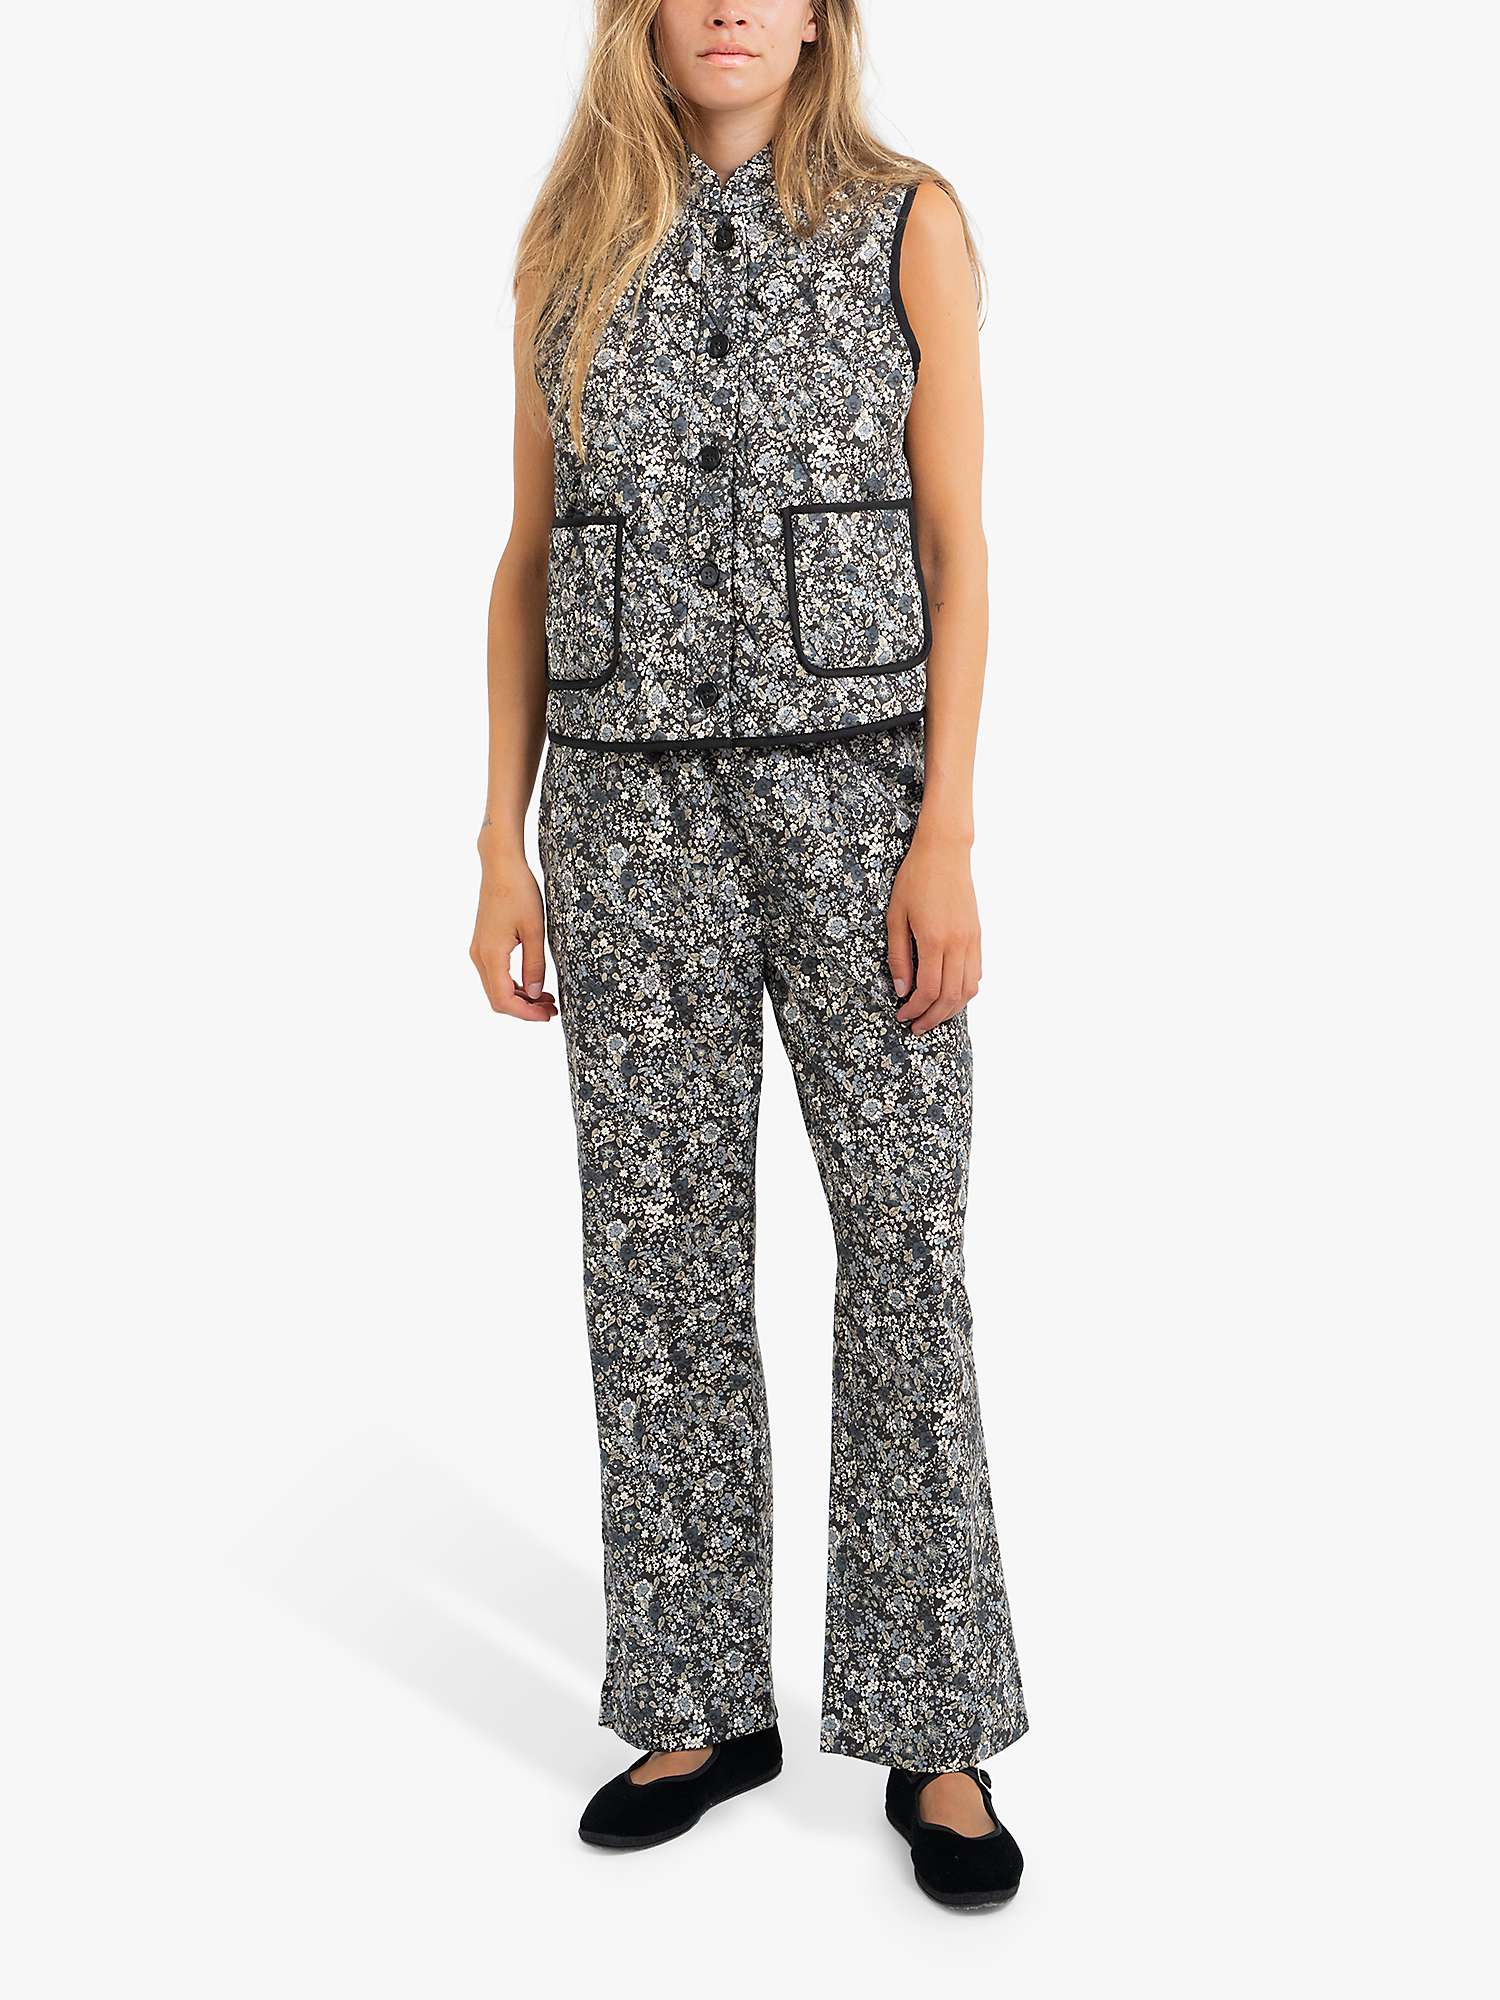 Buy Lollys Laundry Bill Floral Trousers Online at johnlewis.com